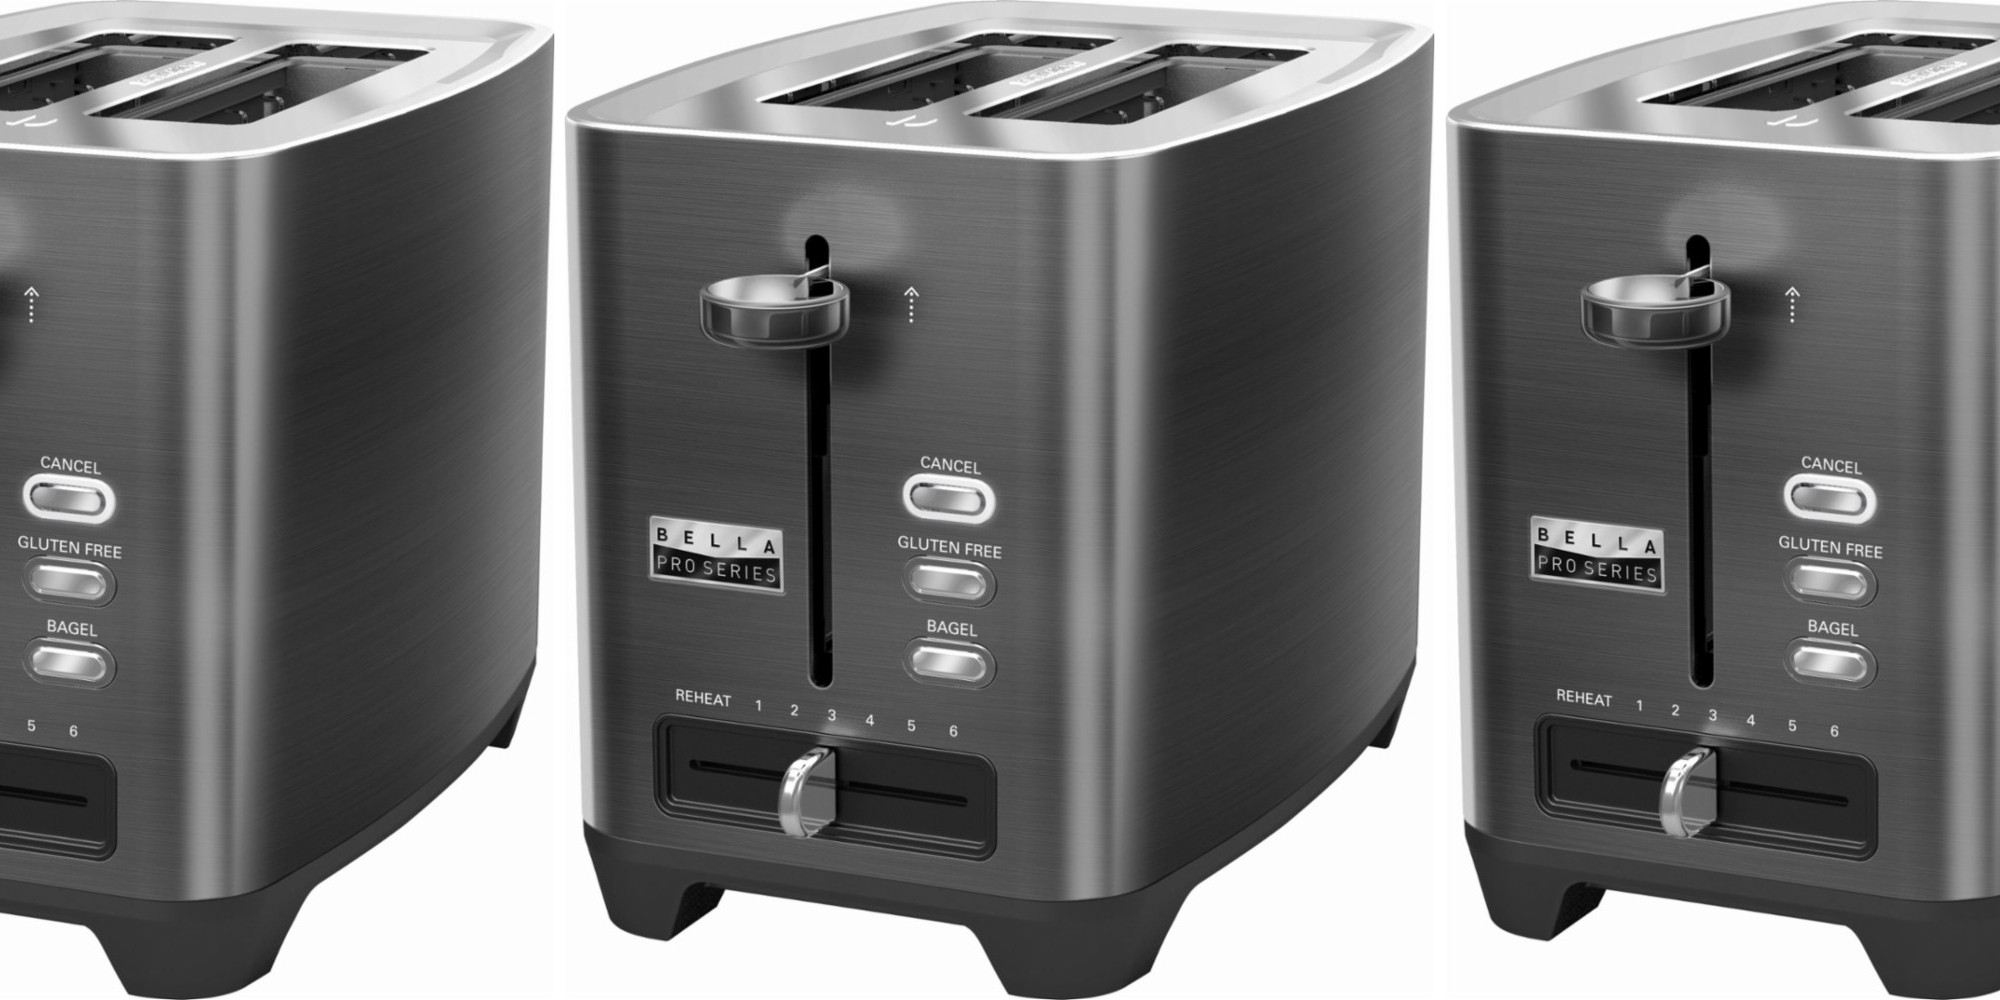 https://9to5toys.com/wp-content/uploads/sites/5/2018/02/bella-pro-series-2-slice-extra-wide-slot-toaster.jpg